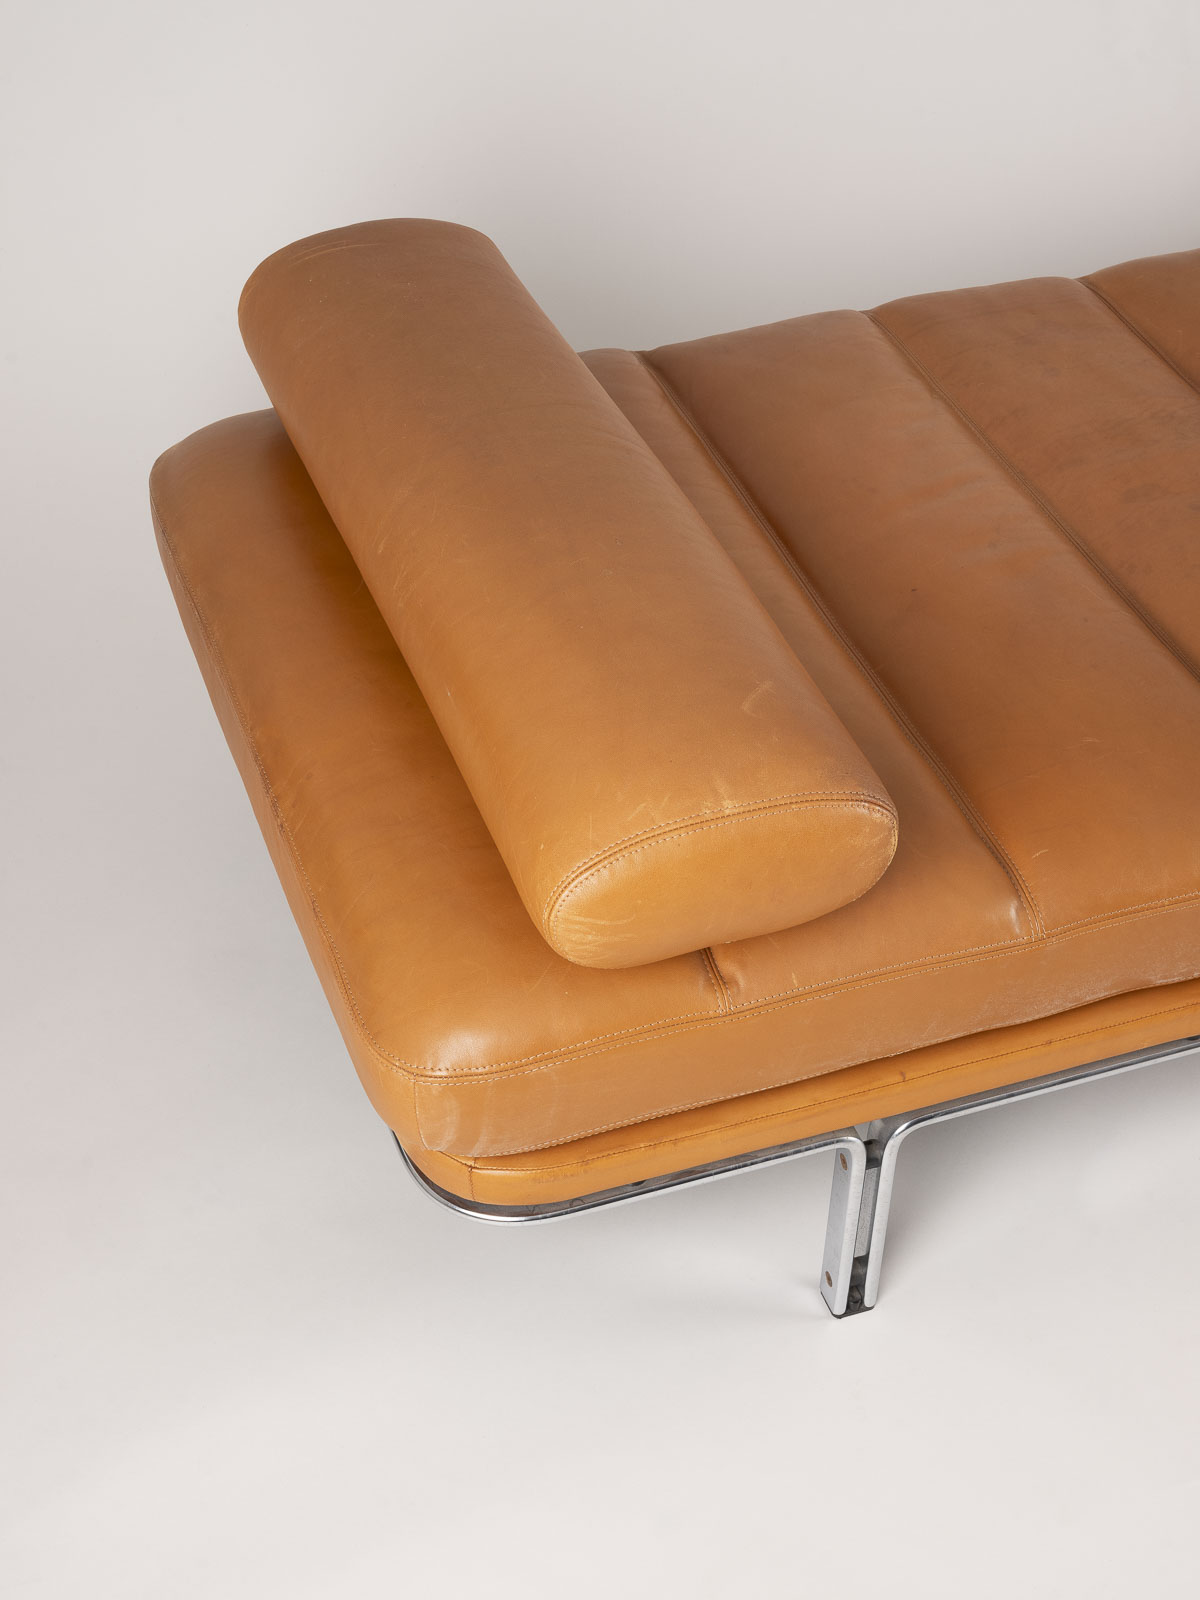 DAYBED MODELL '6915' - Image 7 of 9